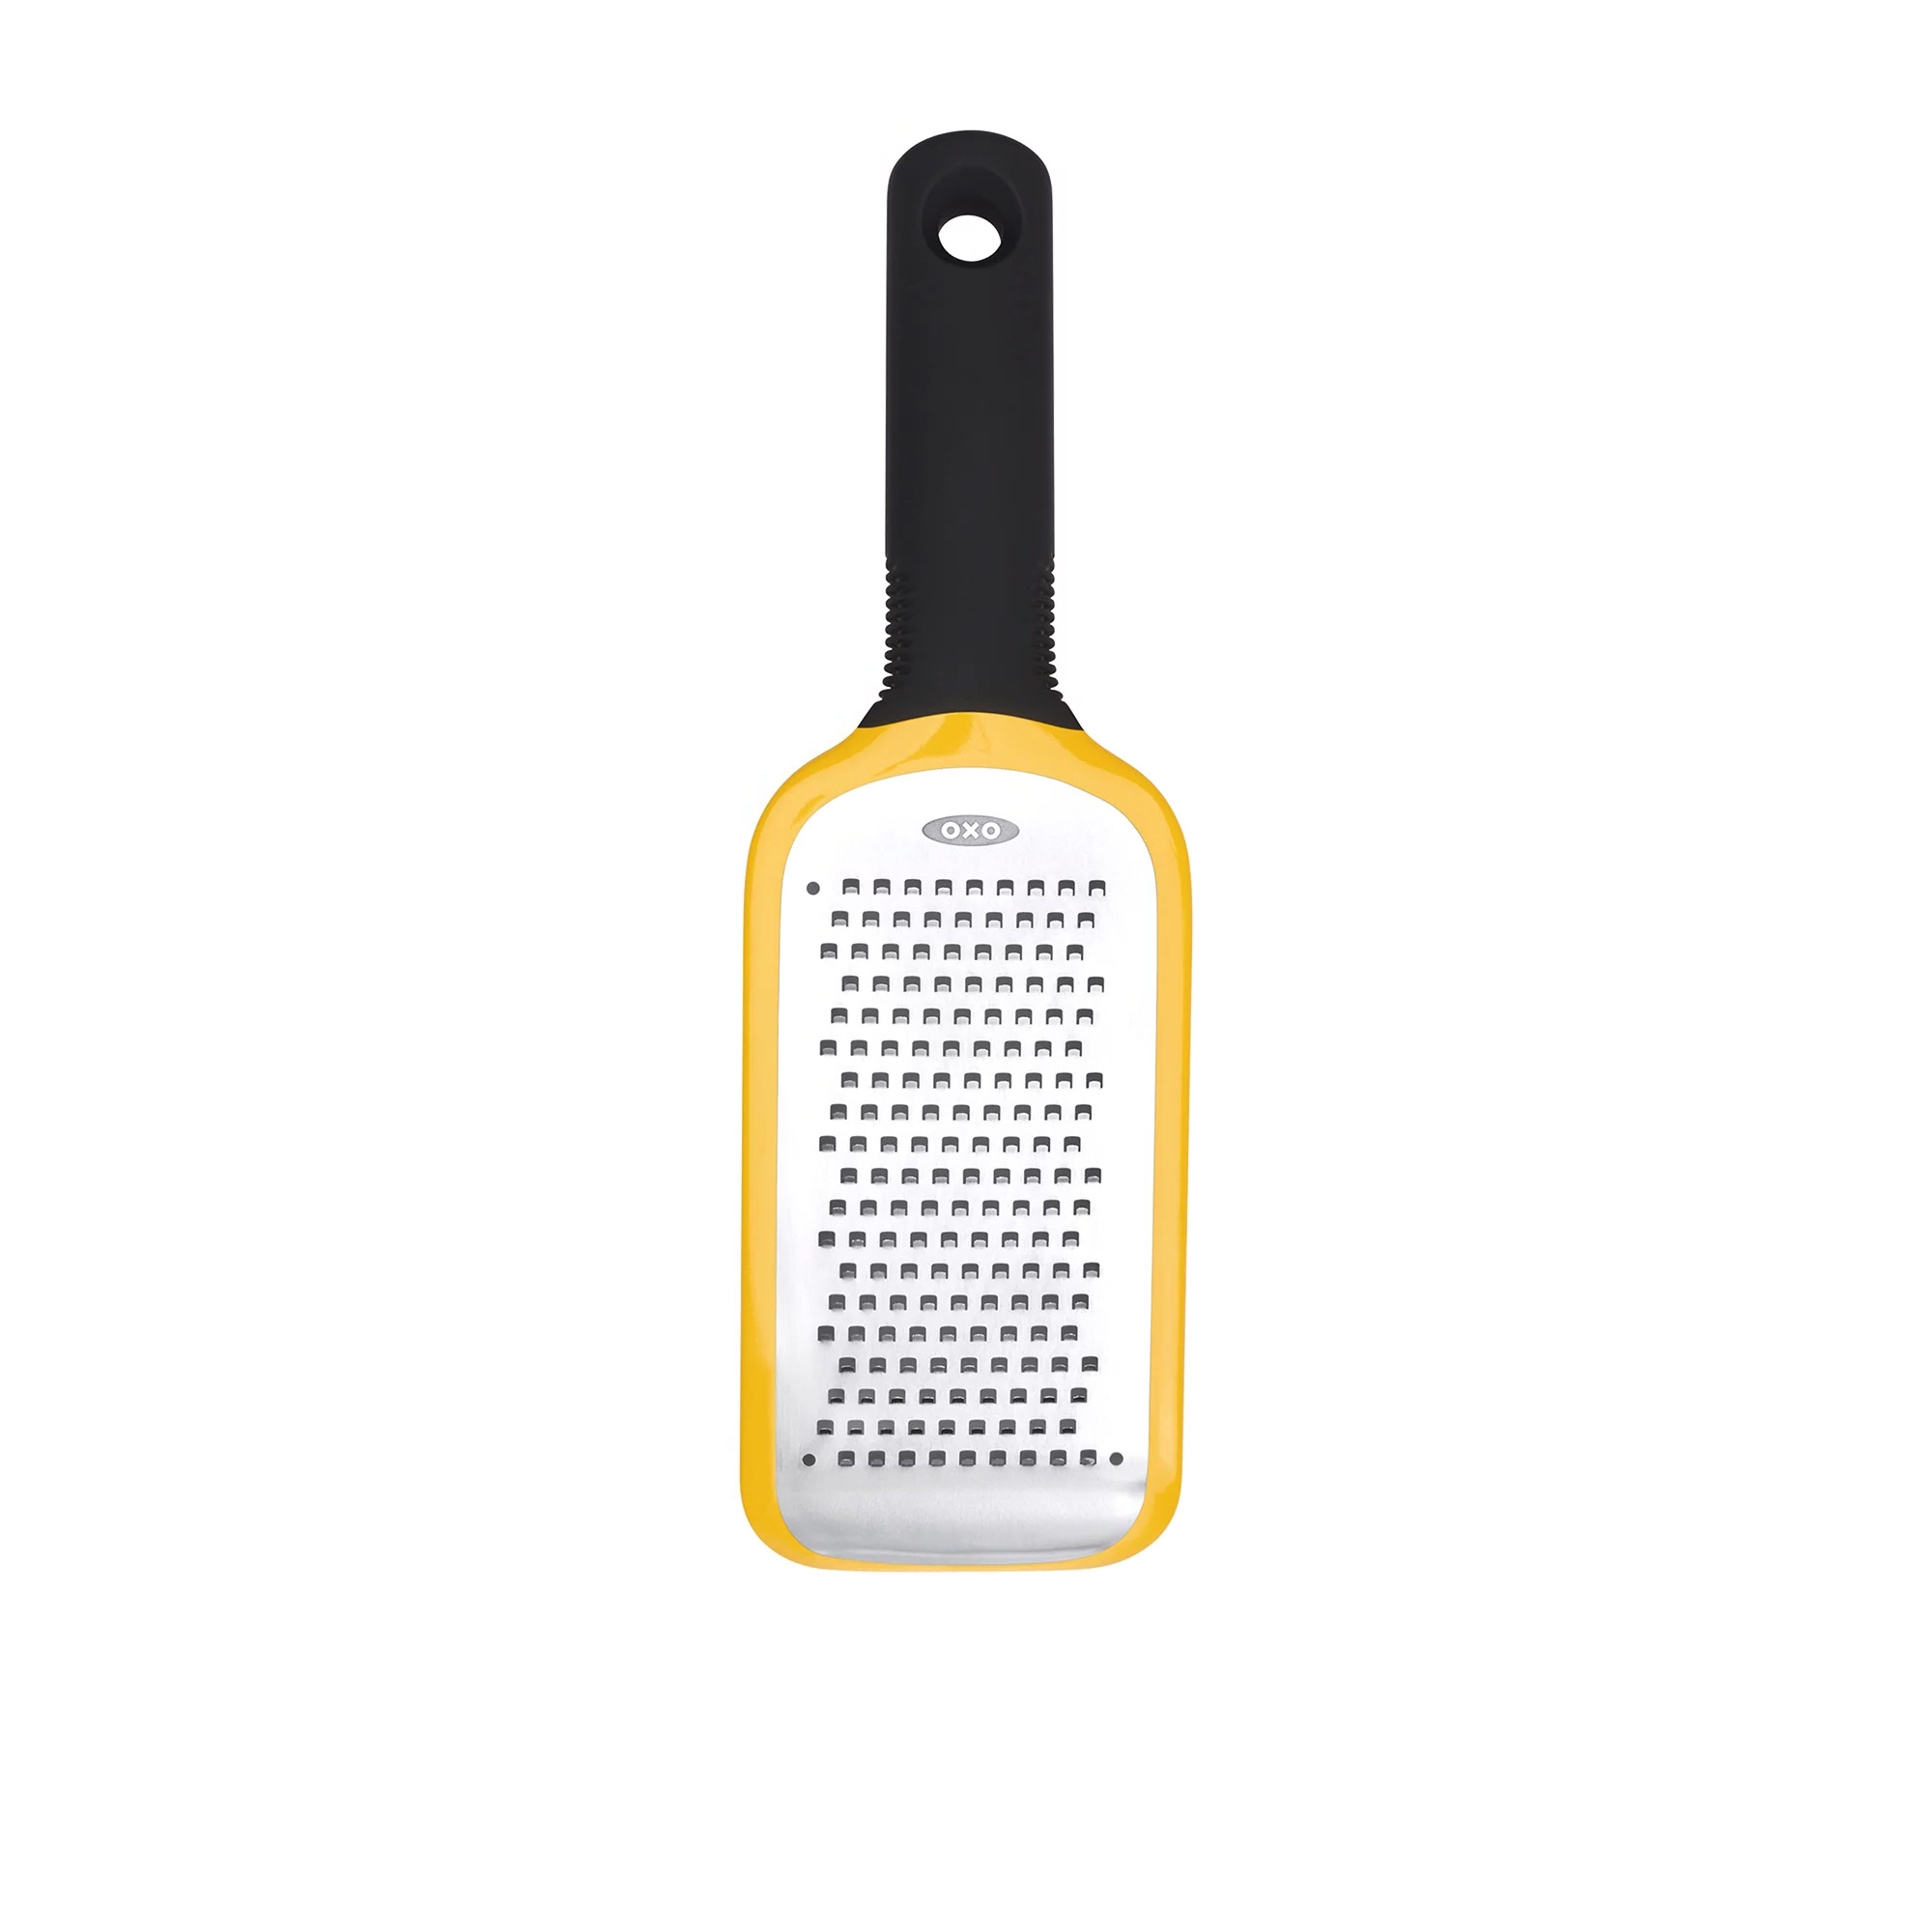 OXO Good Grips Etched Grater Medium Image 1